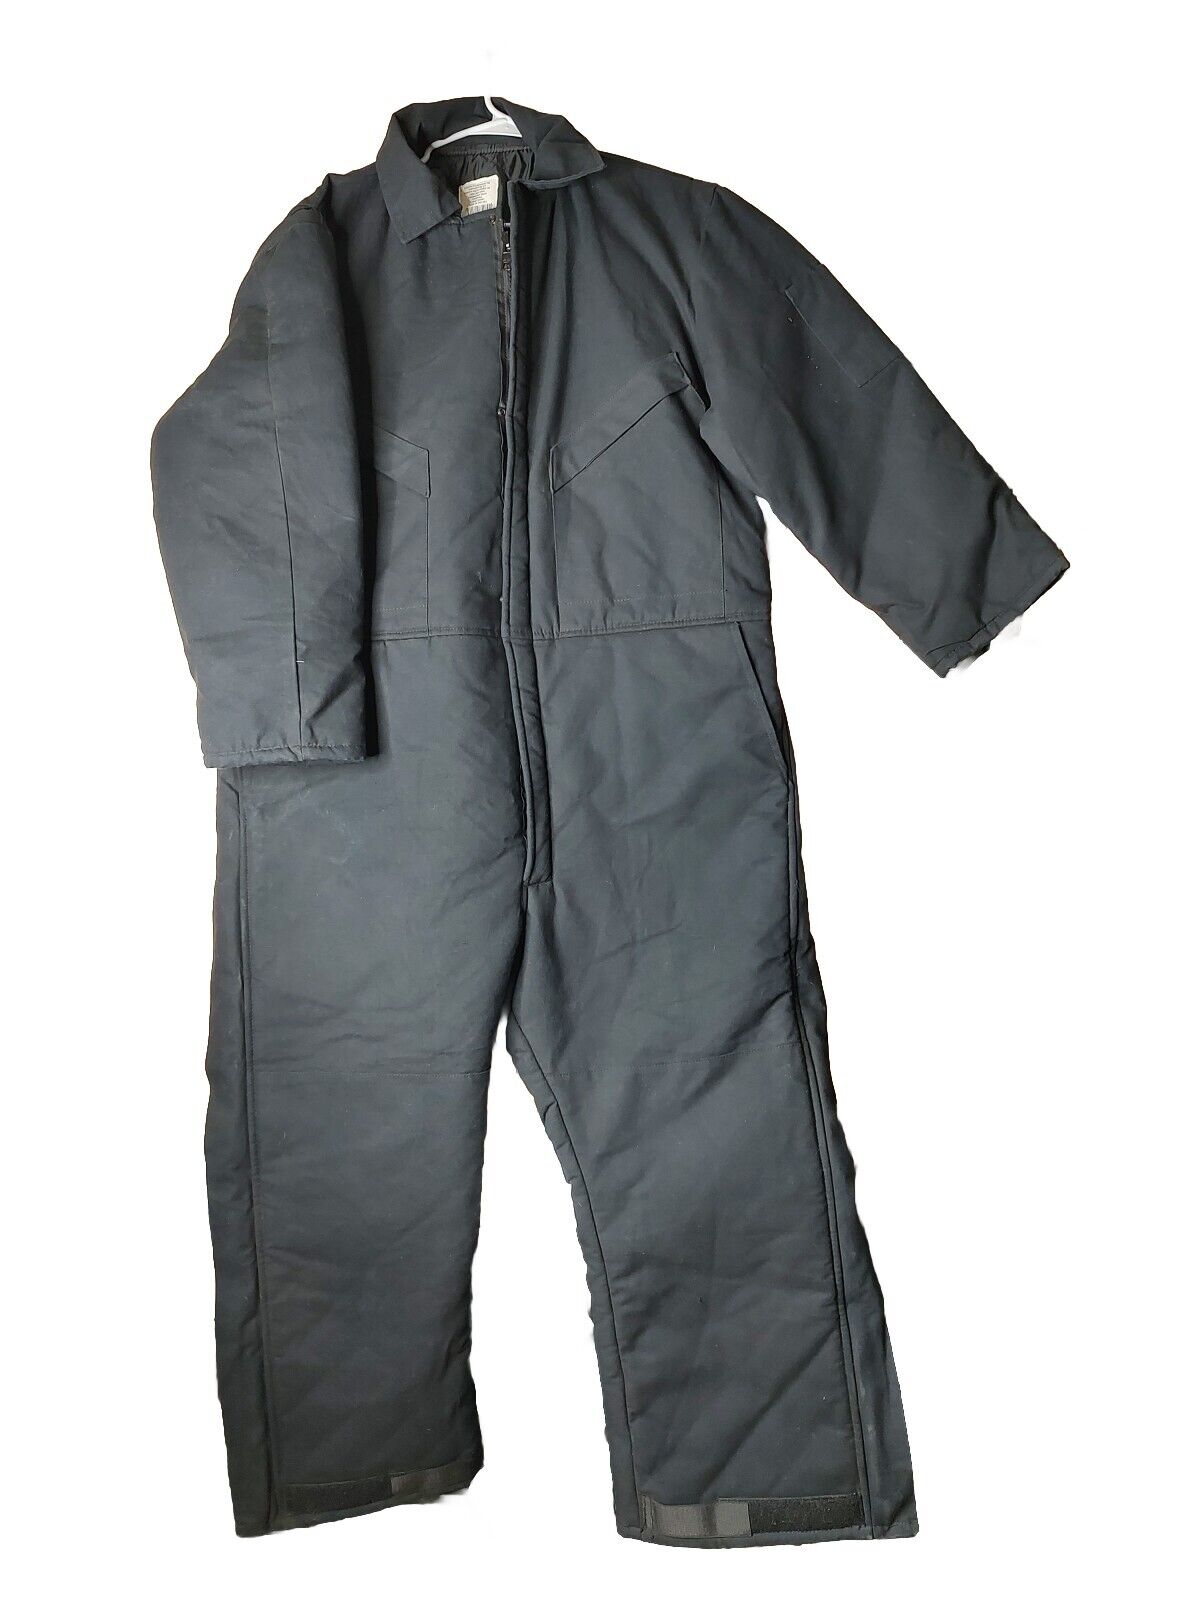 Dakota outerwear 2308001BLK black duck coverall Large Short pre owned